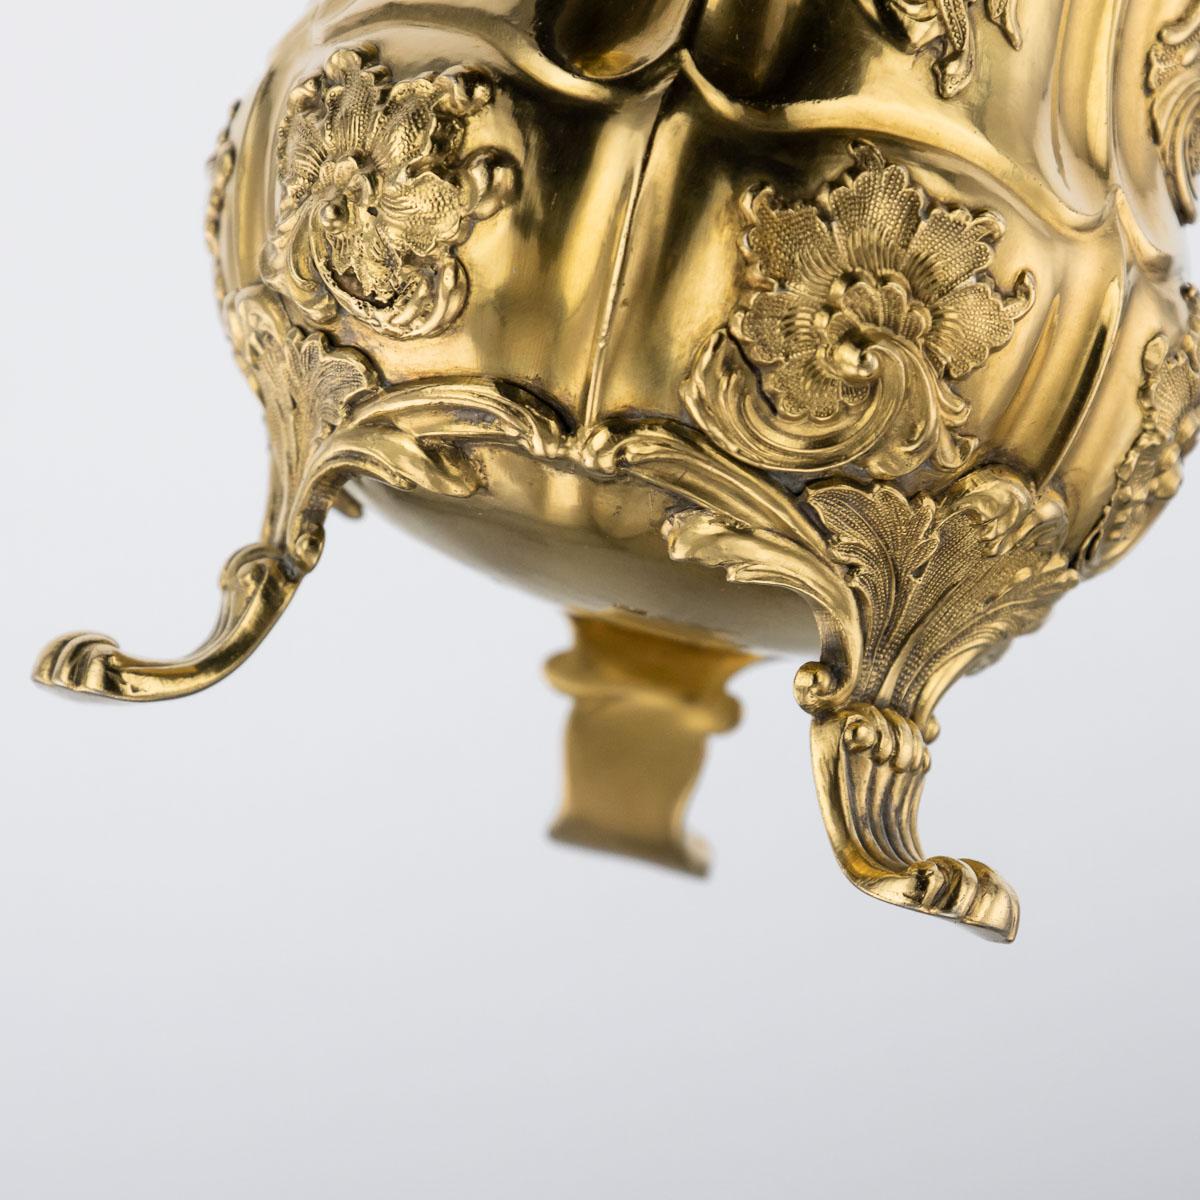 19th Century Russian Solid Silver-Gilt Cup and Cover, St-Petersburg, circa 1842 12